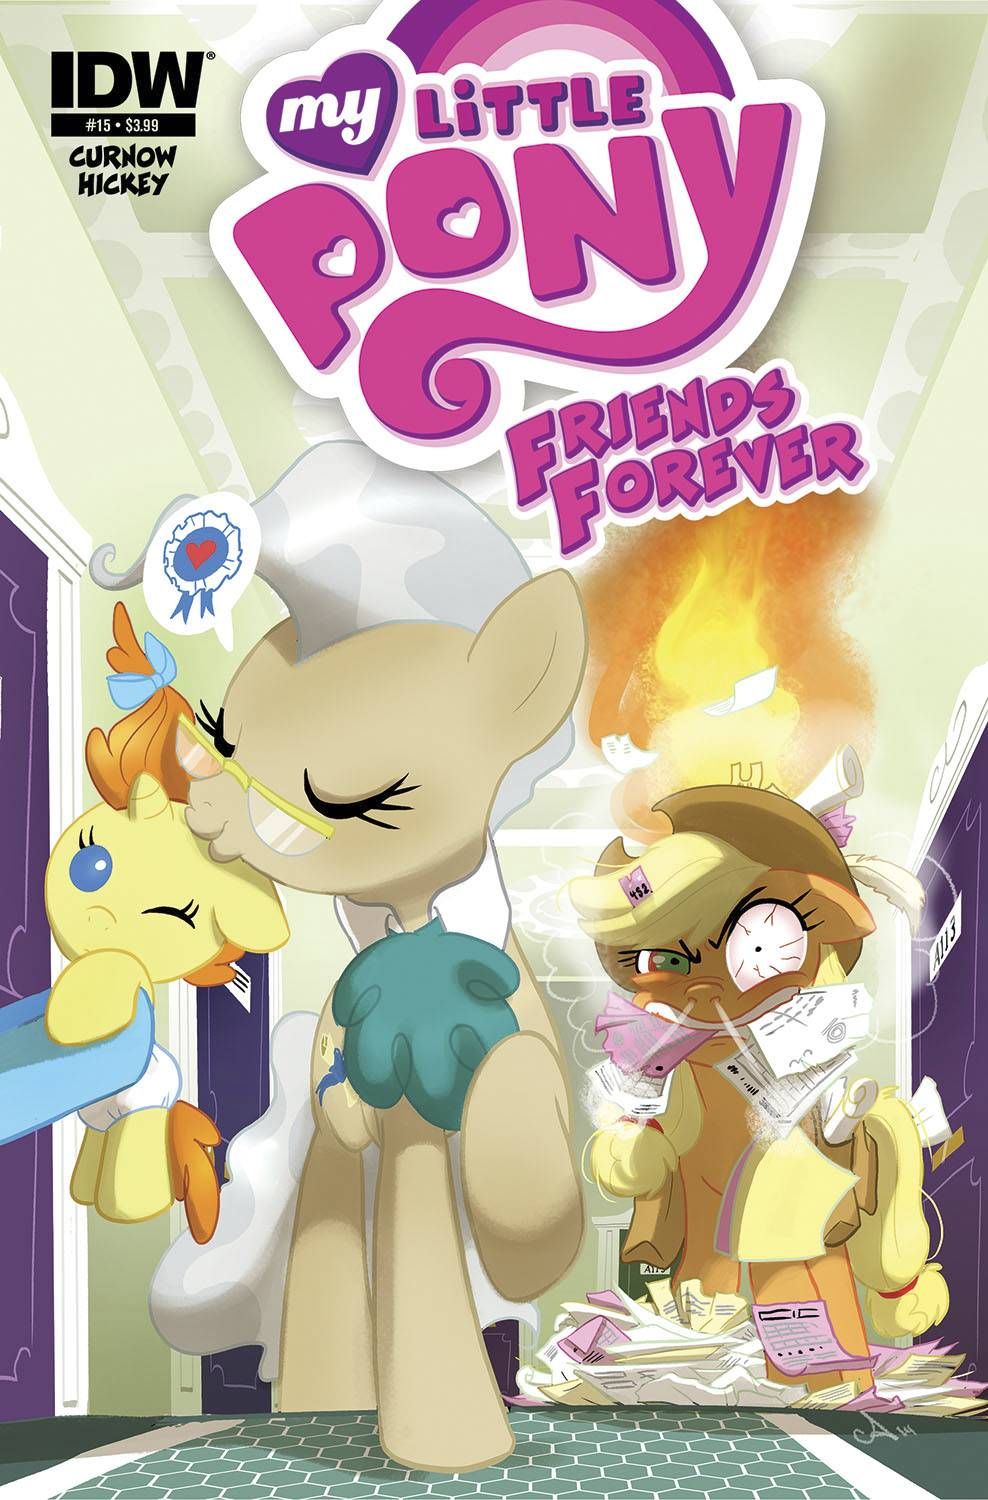 My Little Pony Friends Forever #15 Comic